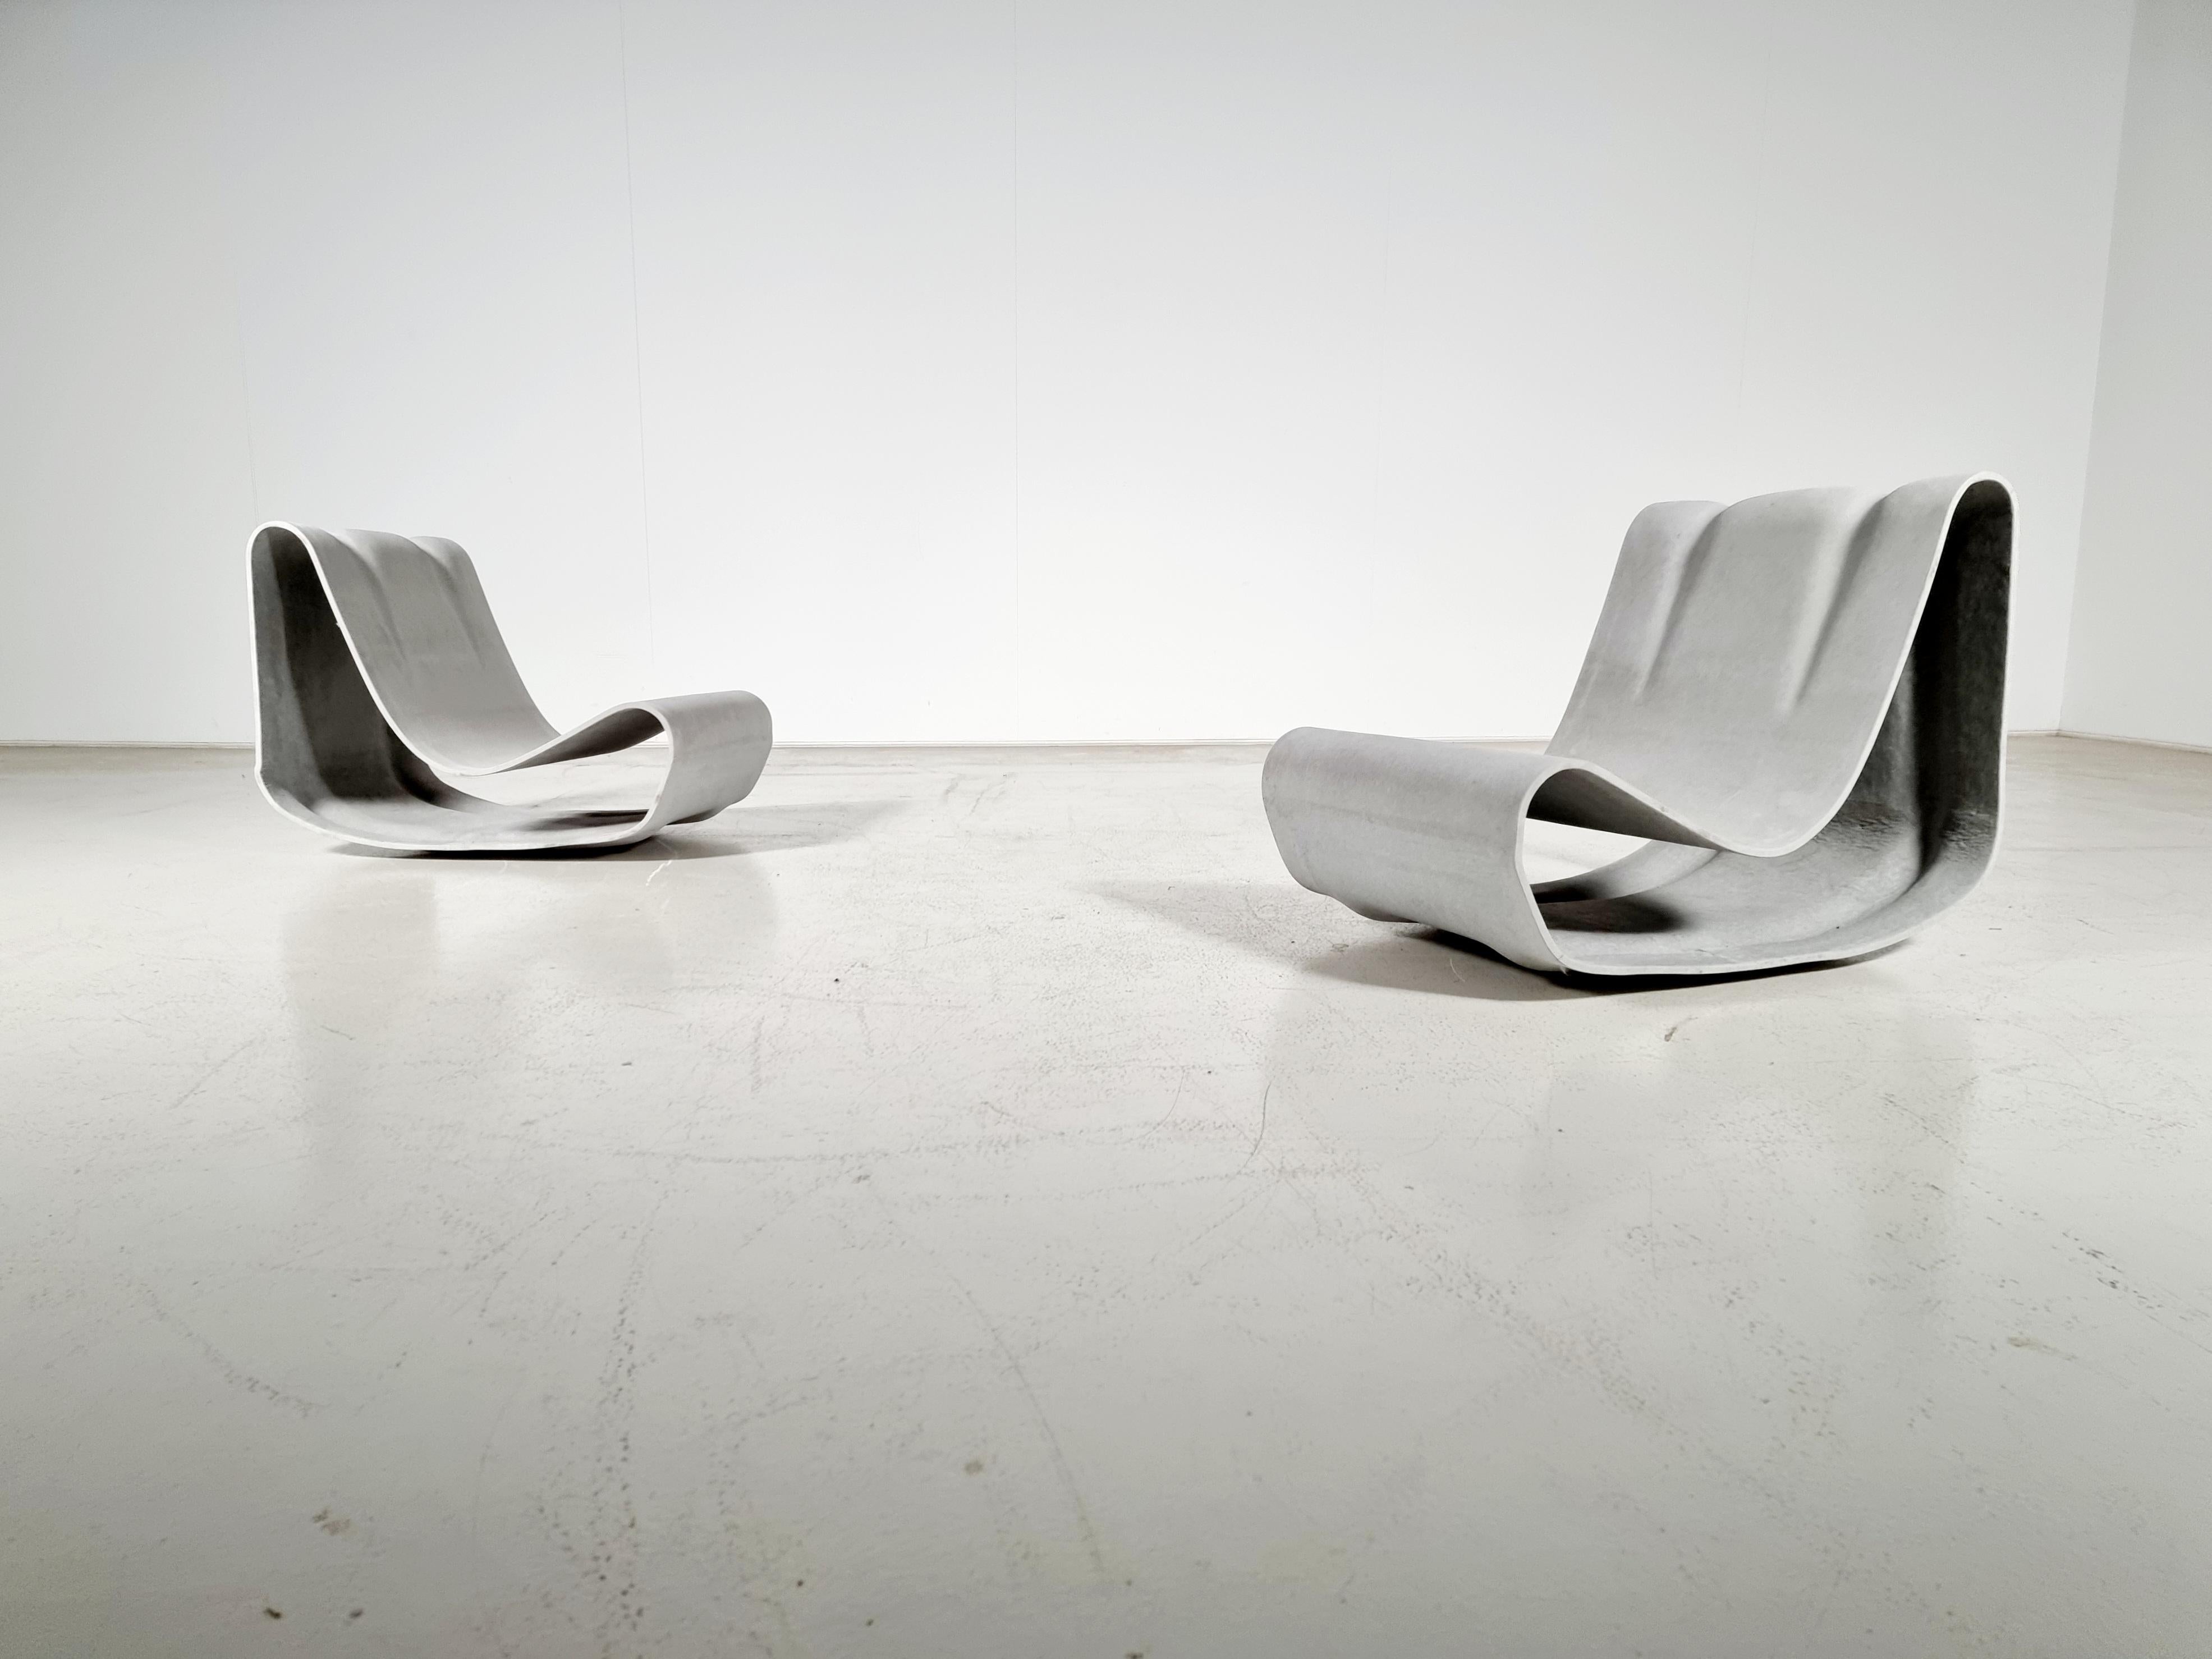 Stunning set of 2 fiber cement Loop chairs by Willy Guhl for Eternit. This iconic design by Willy Guhl was first designed in 1954 for Eternit.
The fine lines and open structure makes it a beautiful piece. The material, fiber-reinforced cement,